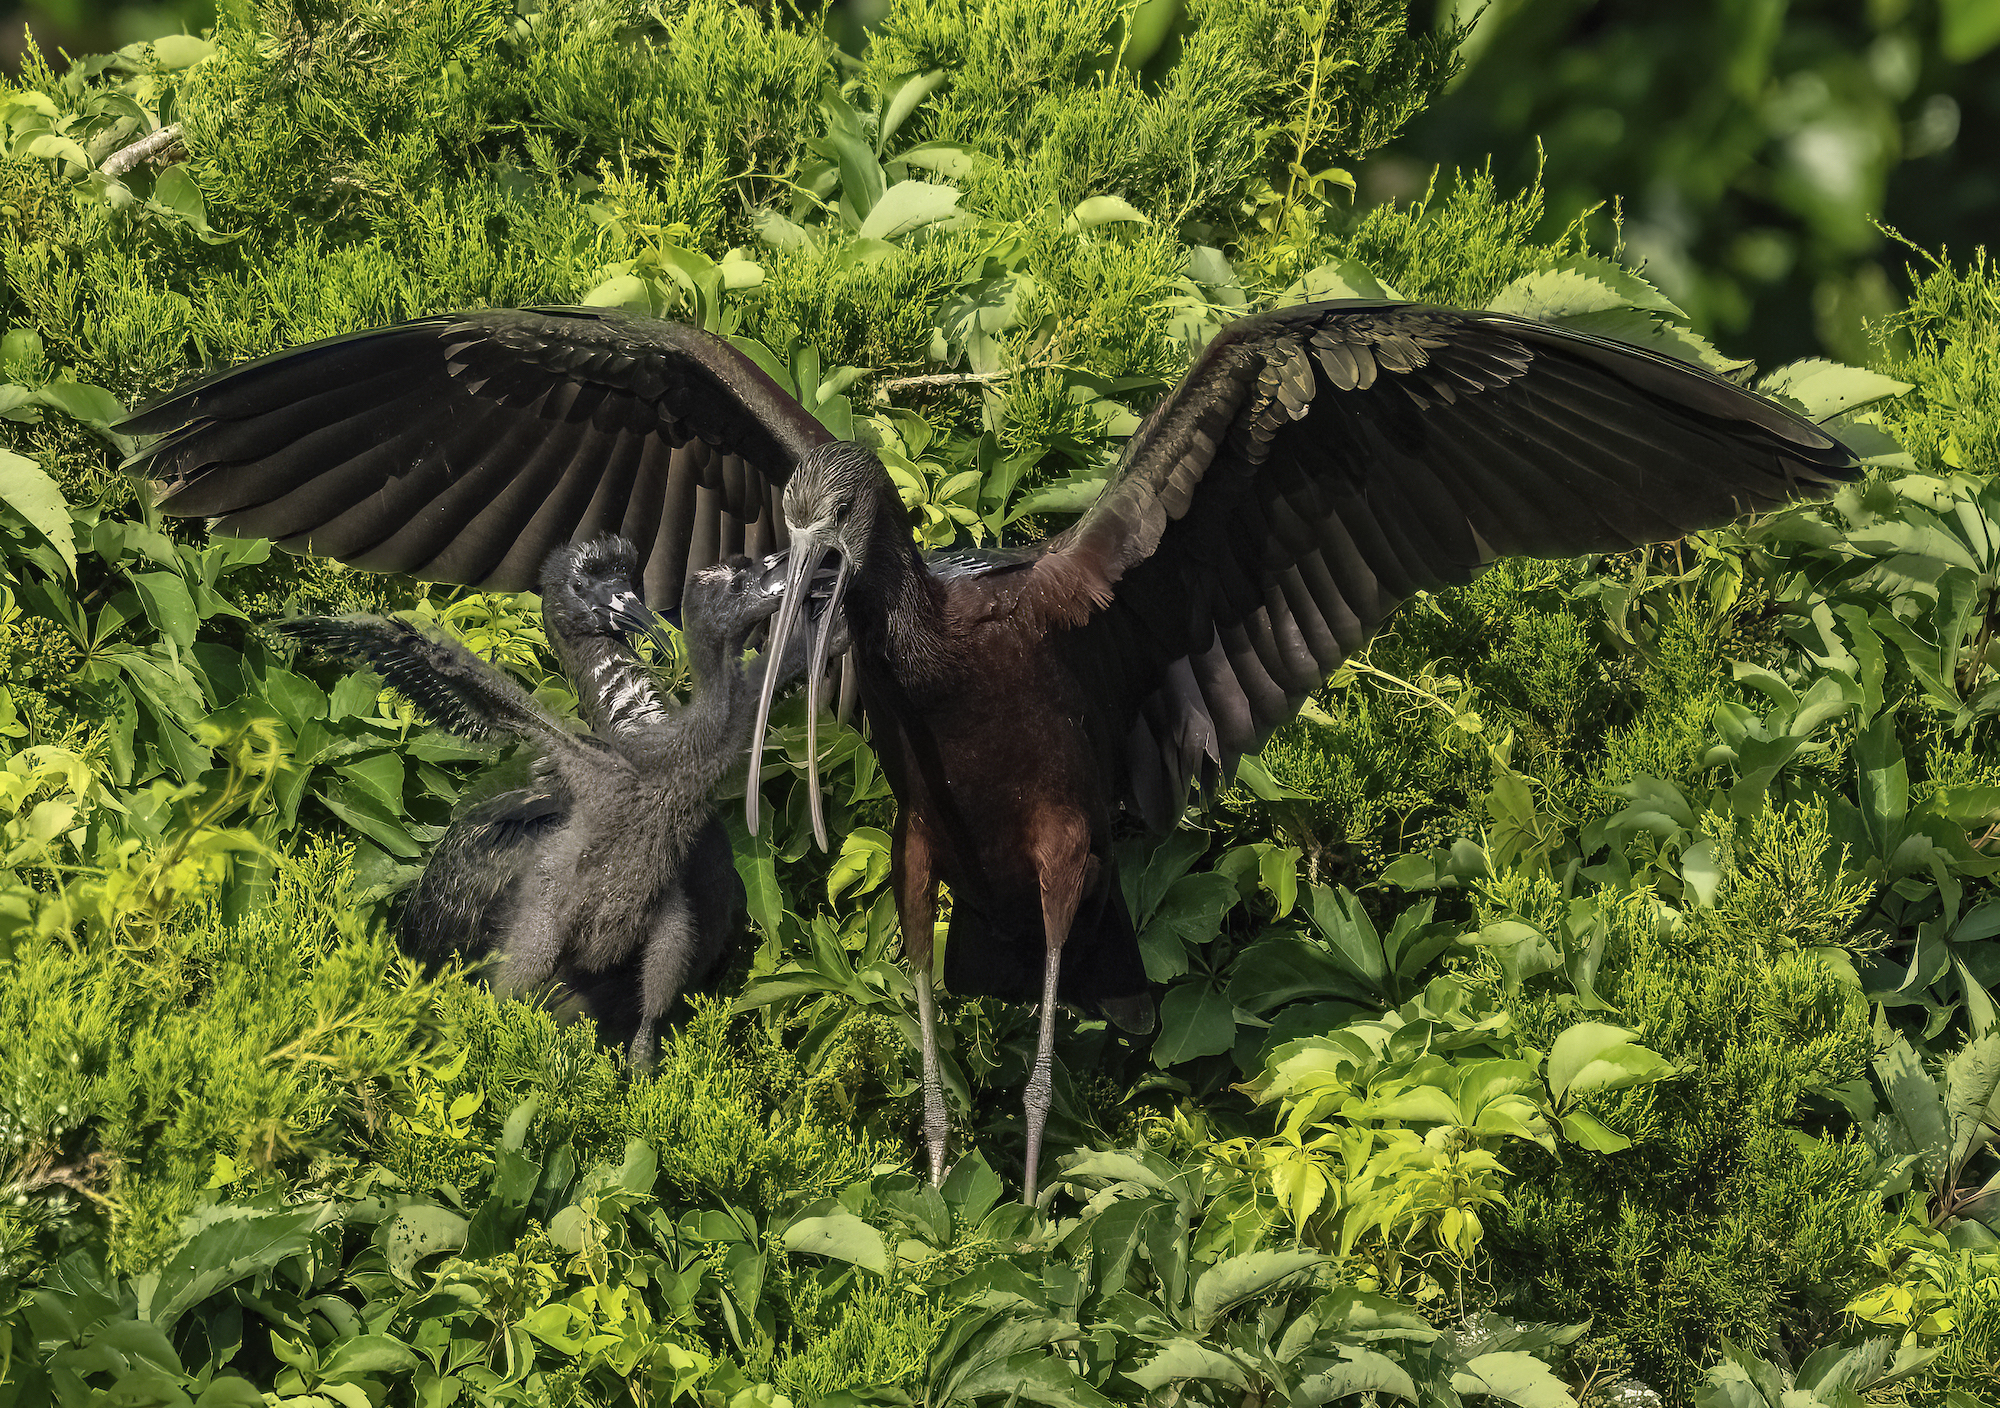 A large black bird outstretches its wings on a grassy patch as it feeds its offspring.